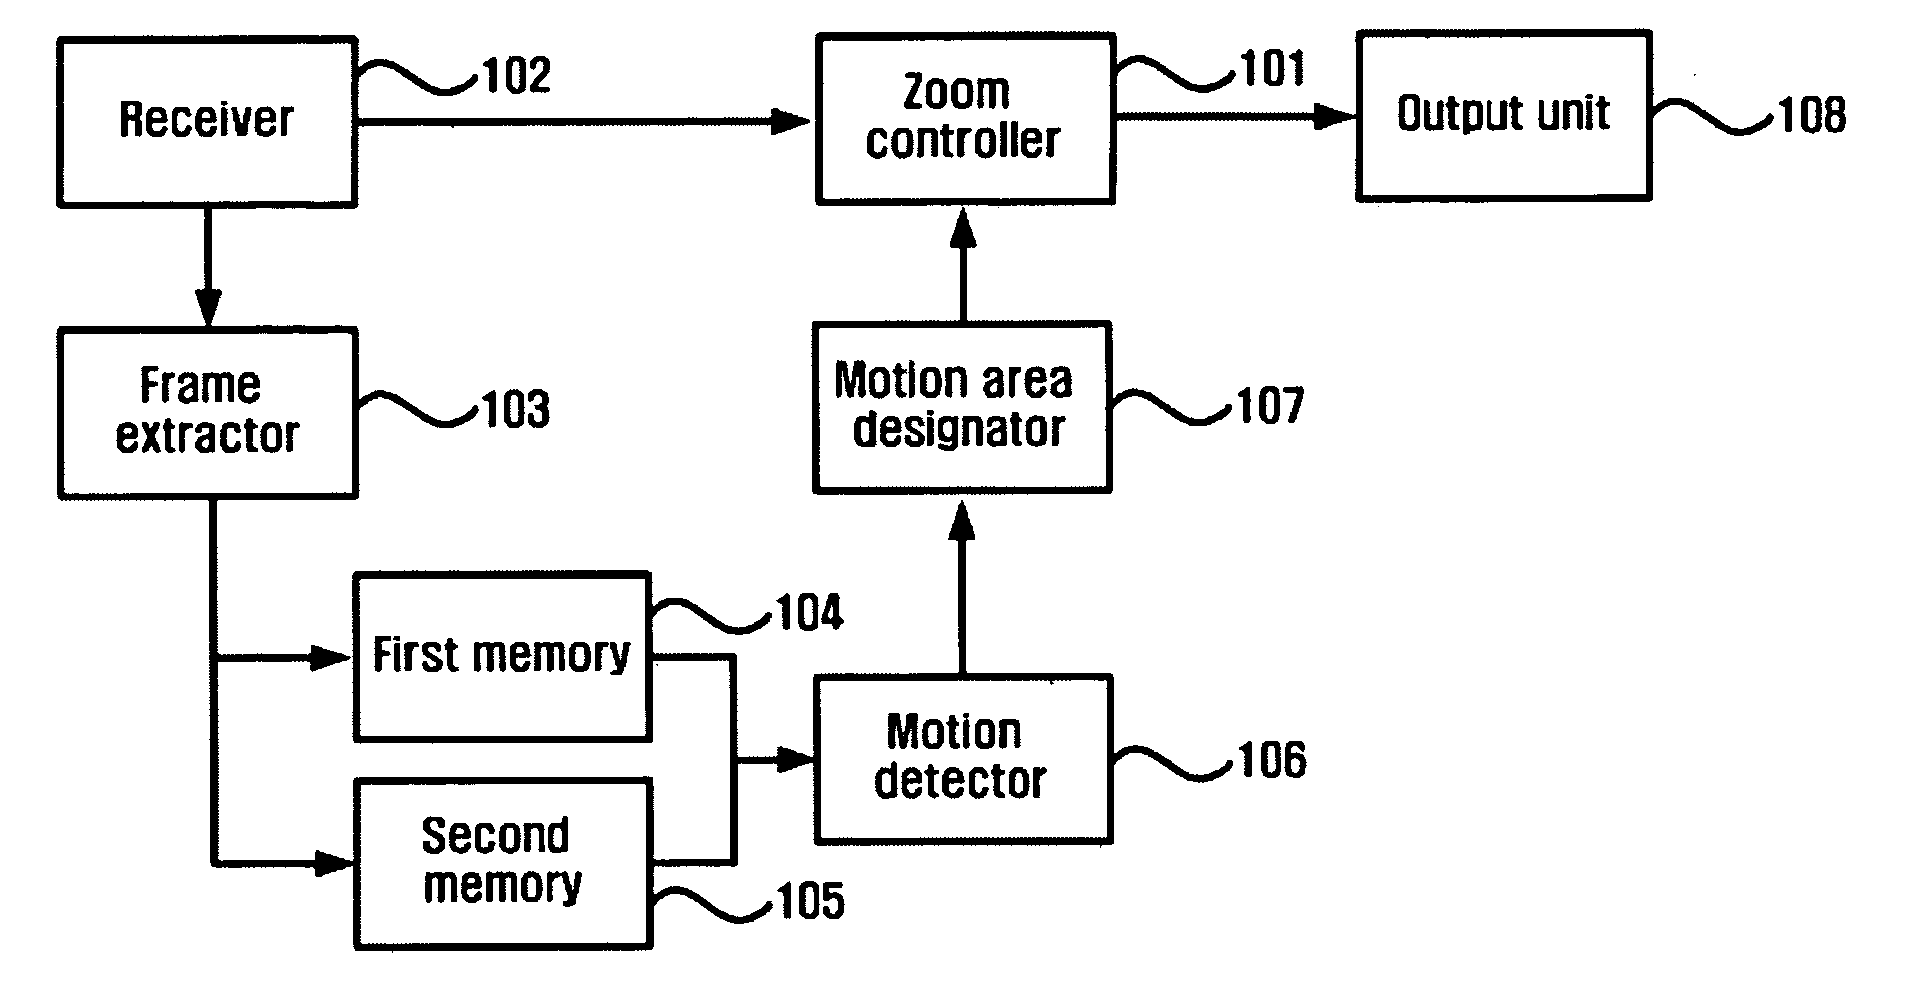 Automatic zoom apparatus and method for playing dynamic images